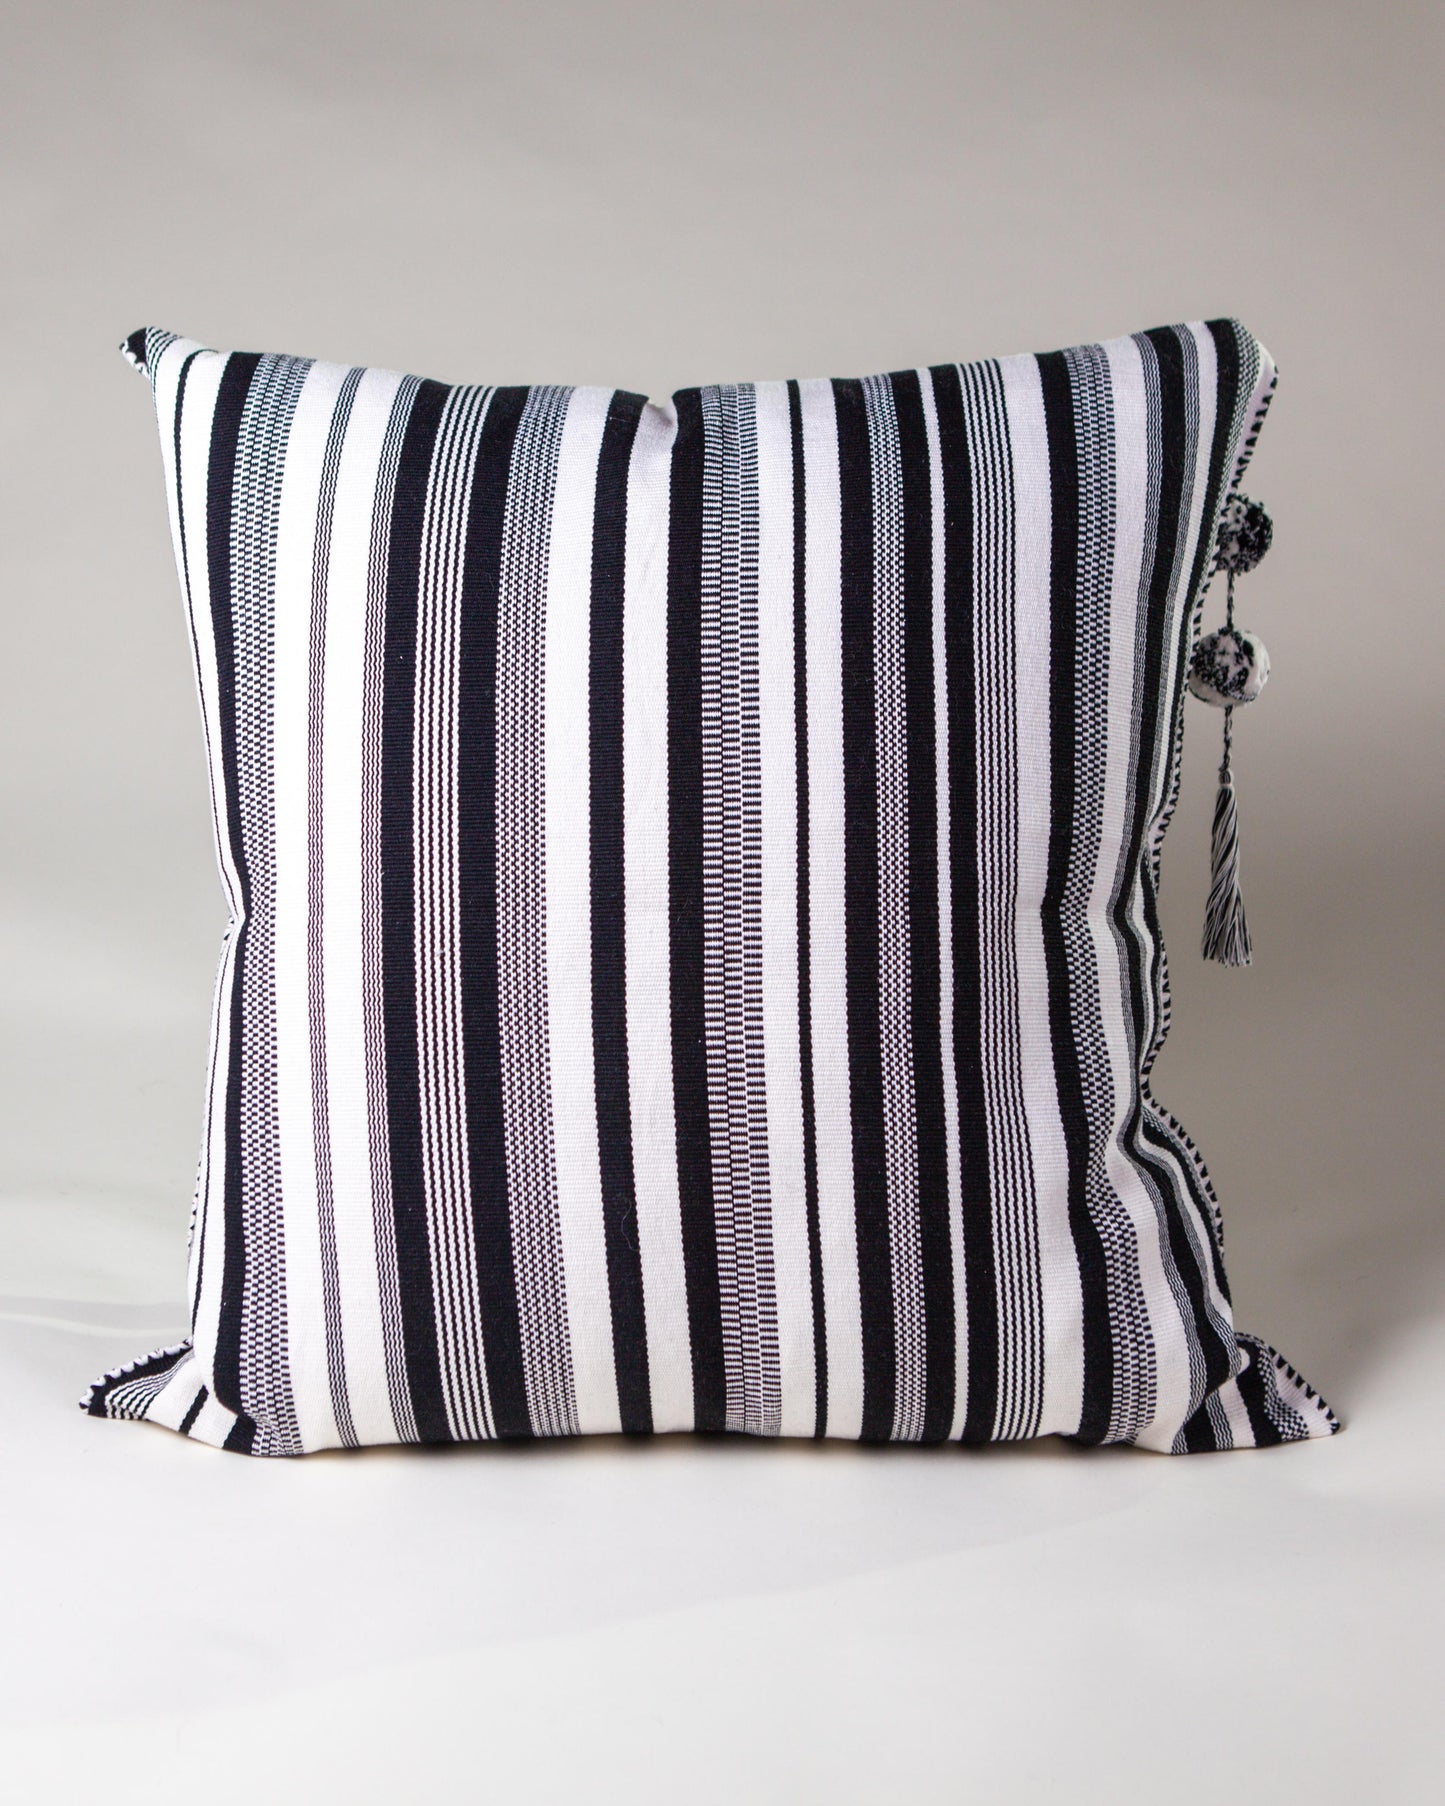 Handwoven cotton pillow with tassel black and white B&W